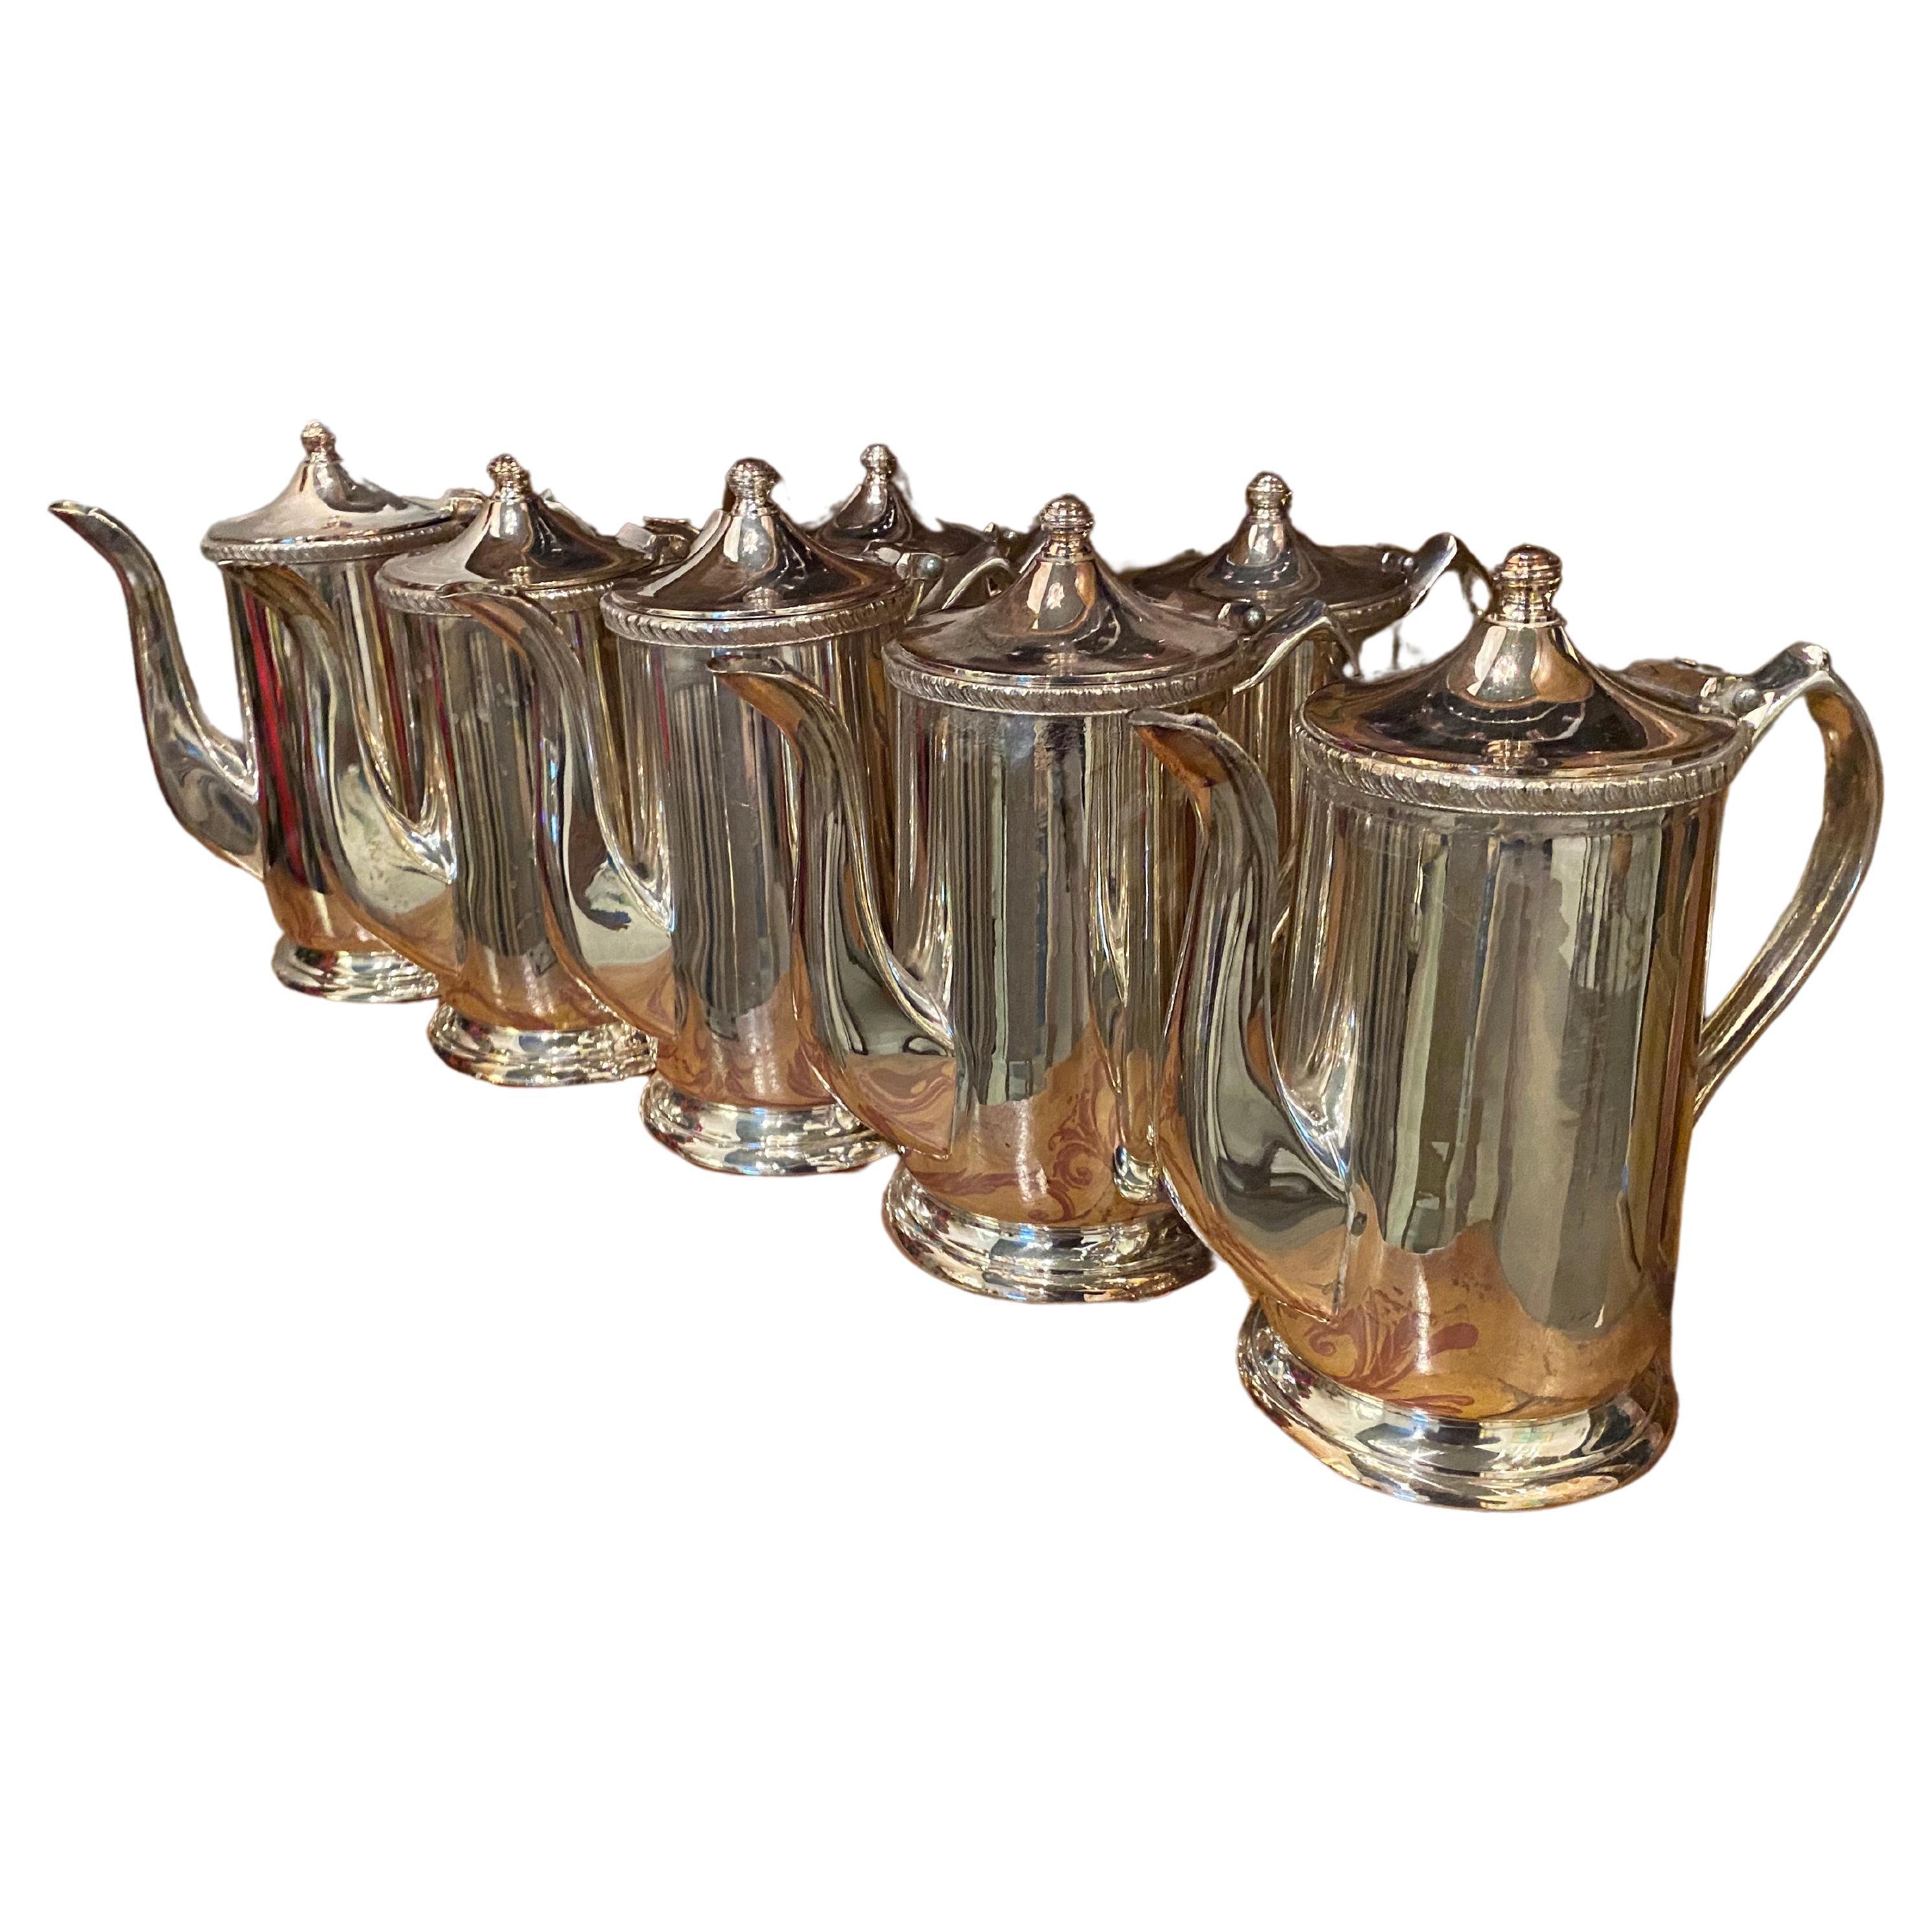 36 English Hotel Silver coffee/tea pots, Nice Weight And Quality. Priced Per Pot For Sale